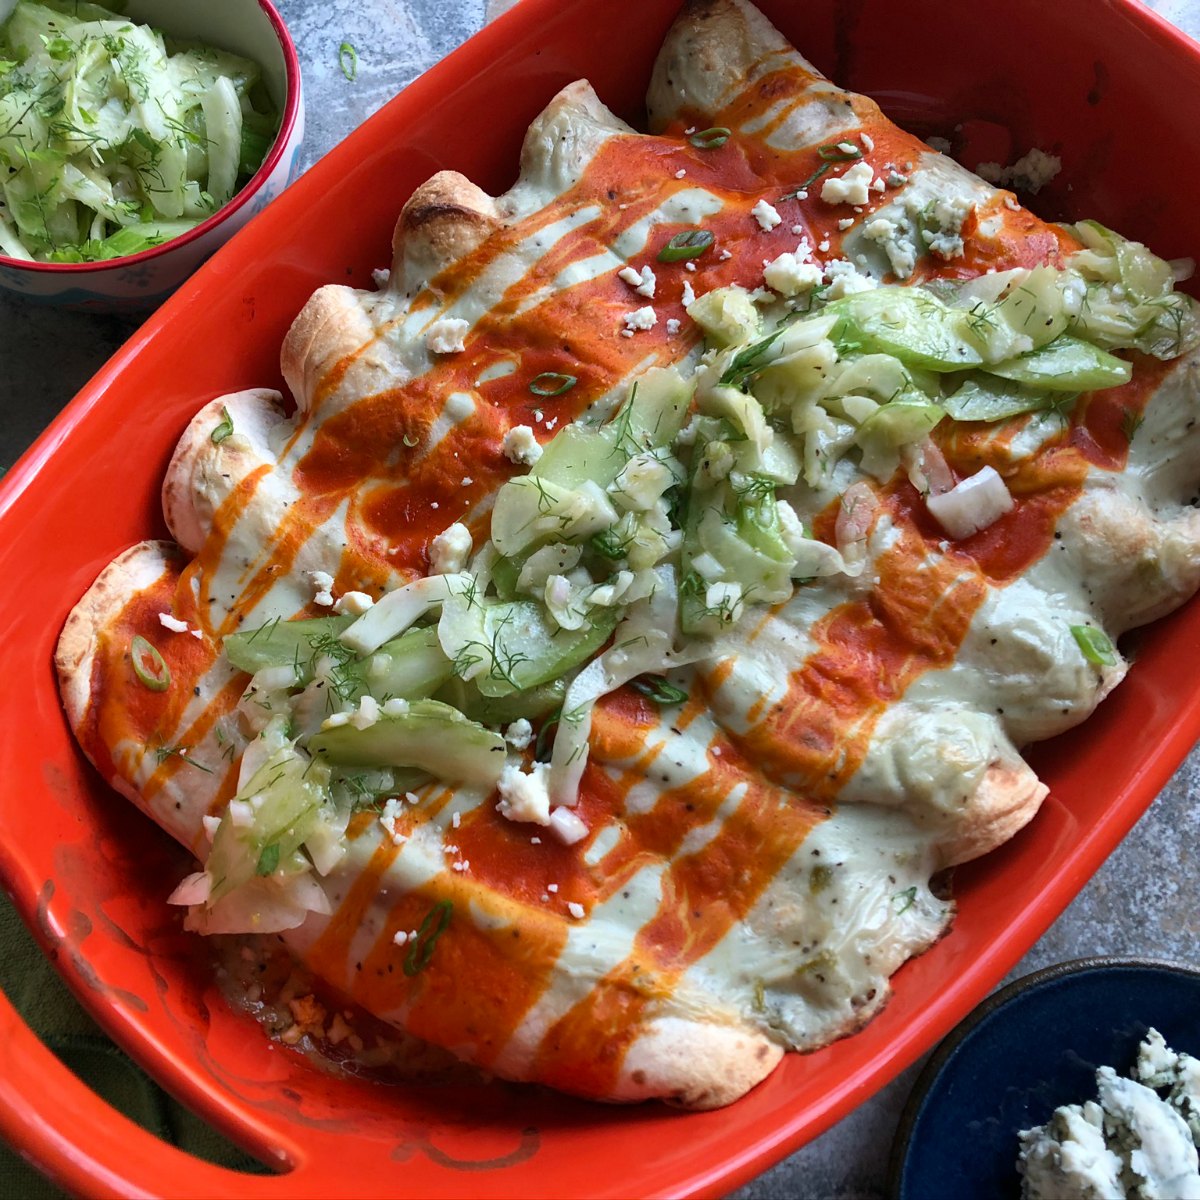 orange casserole dish filled with enchiladas on gray table